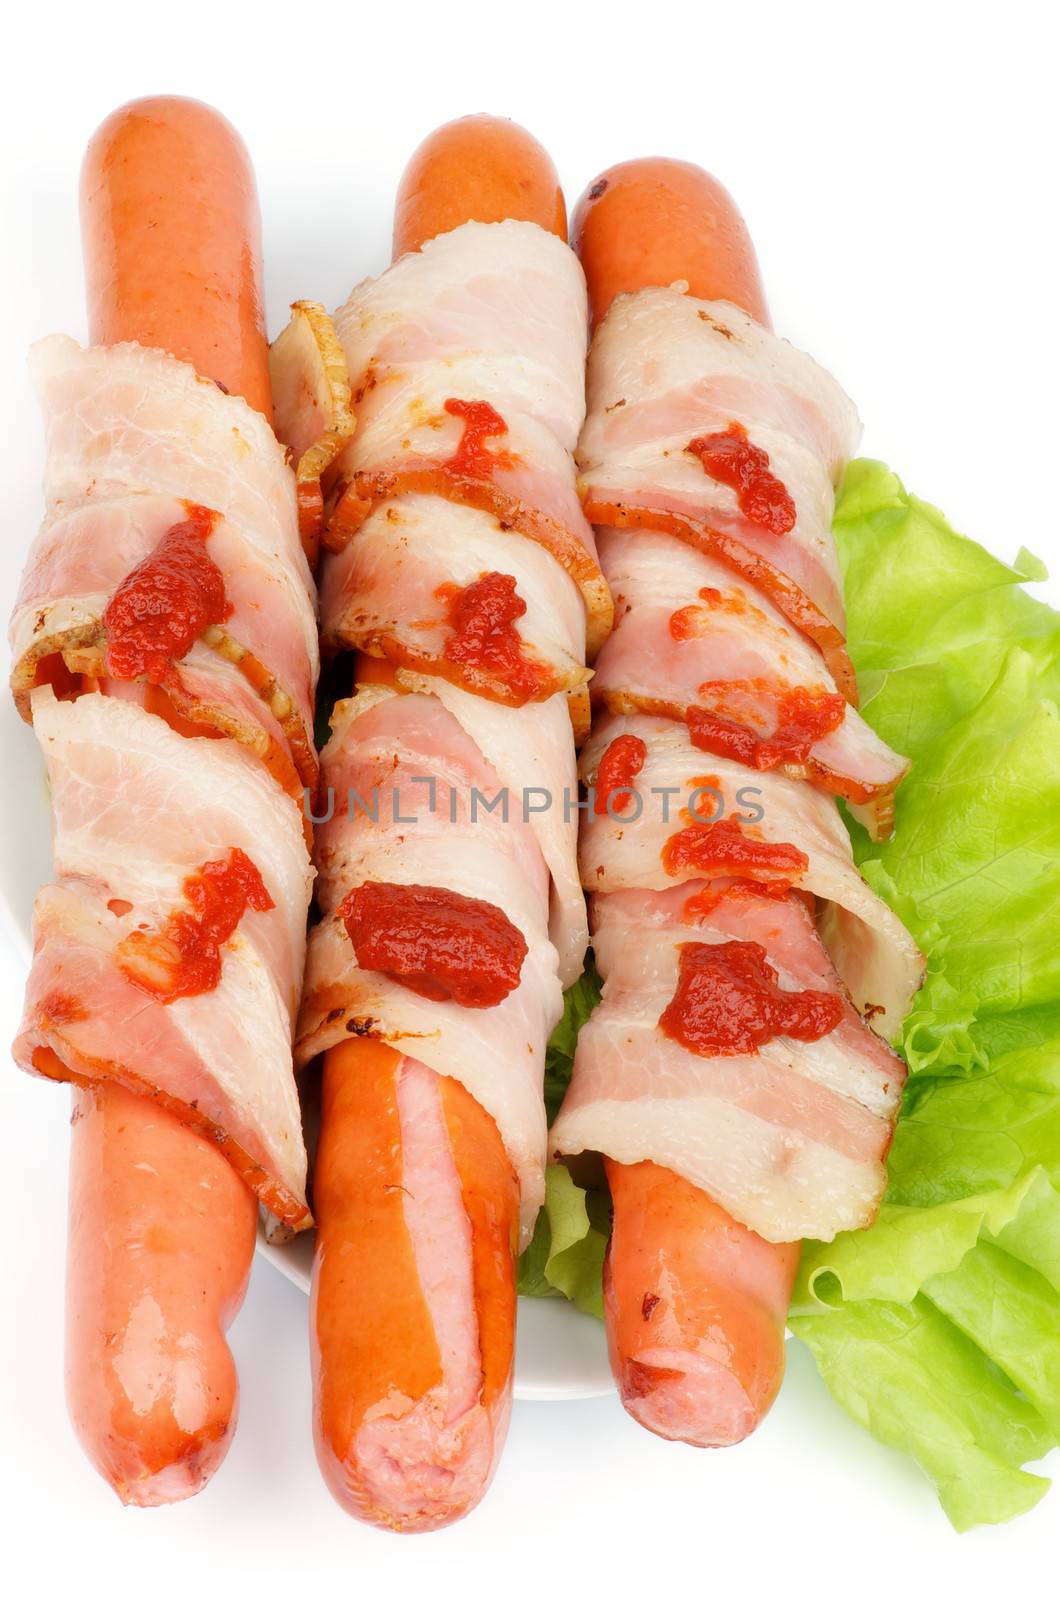 Sausages Wrapped in Bacon by zhekos